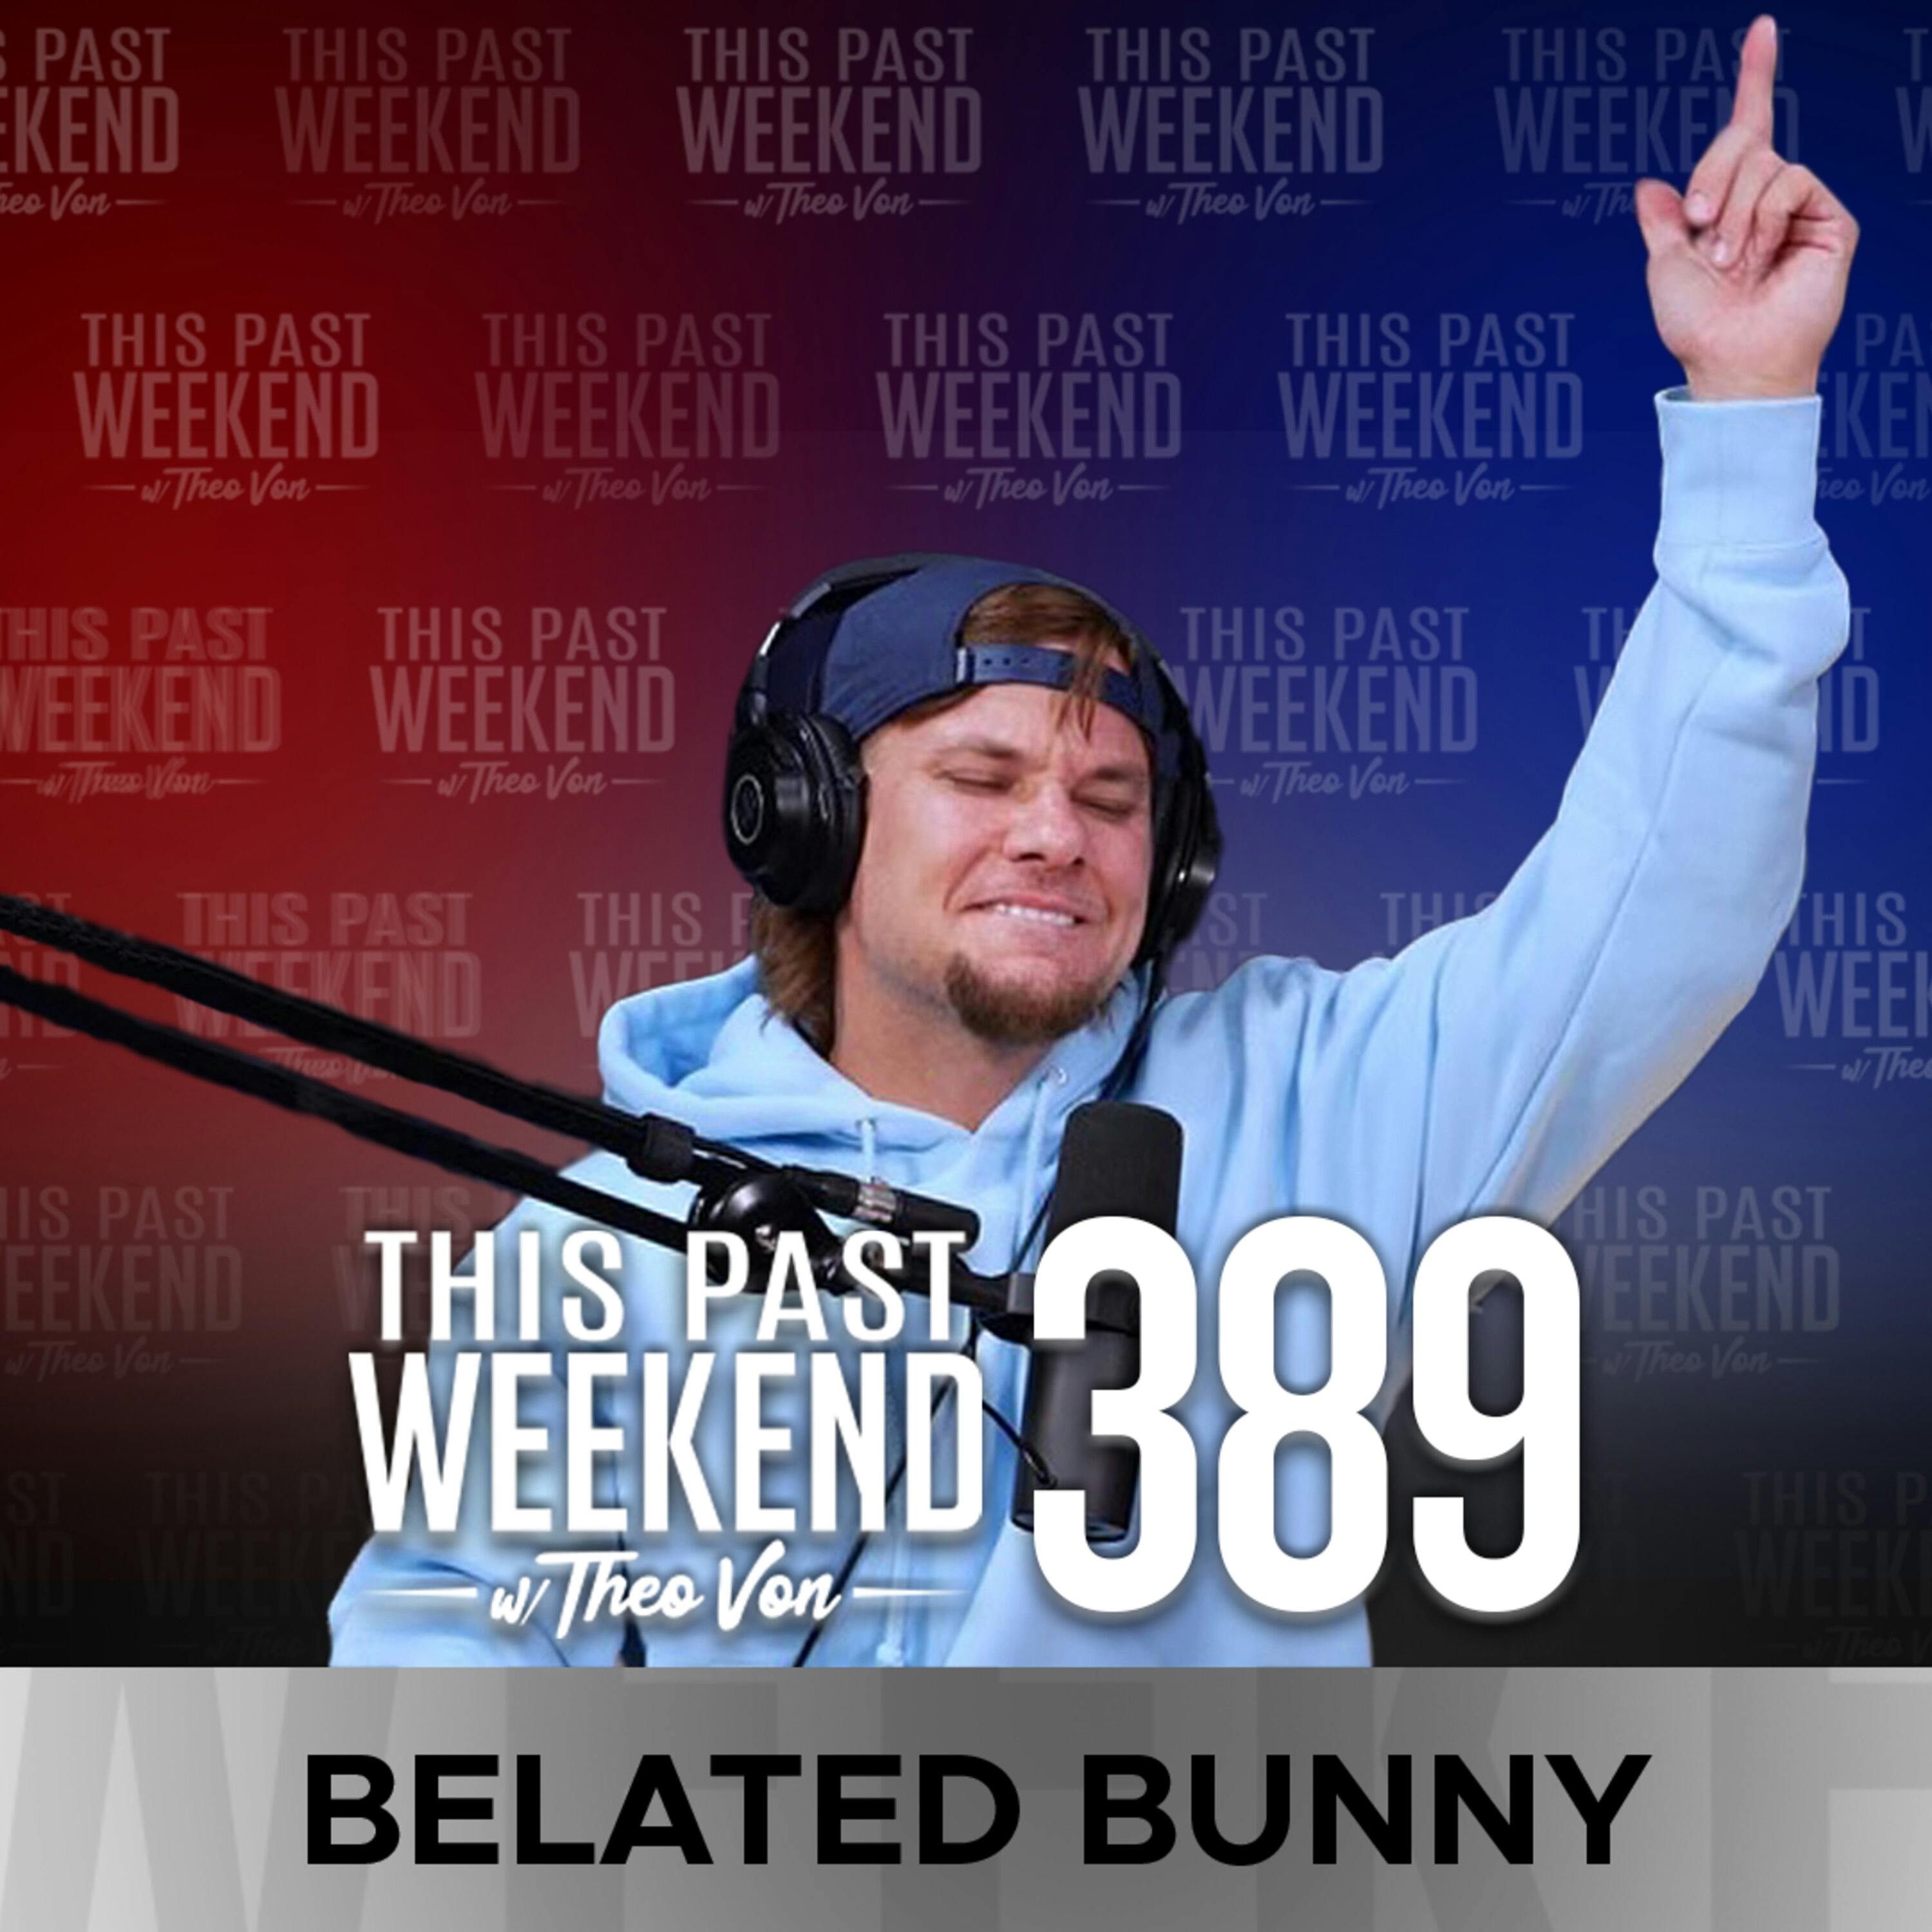 E389 Belated Bunny by Theo Von